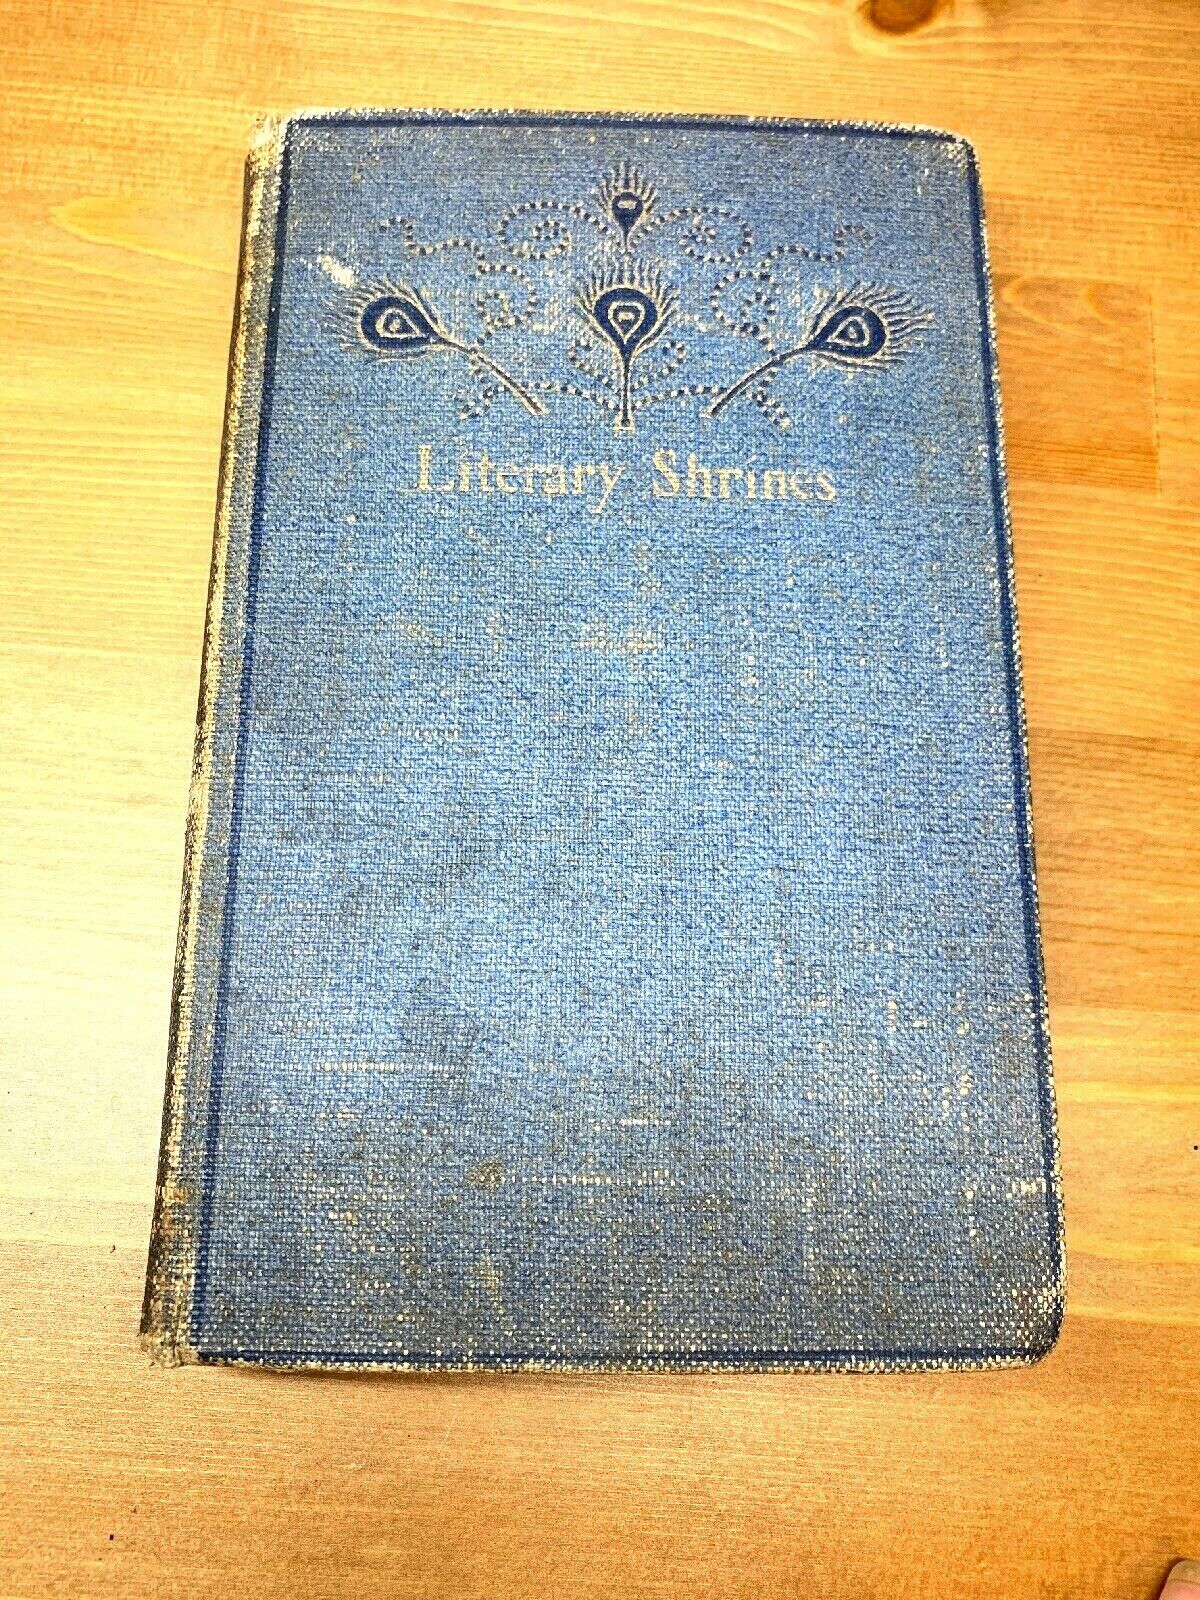 Antique 1895 Literary Shrines - Fifth Edition by Theodore F Wolfe ~ Hardcover